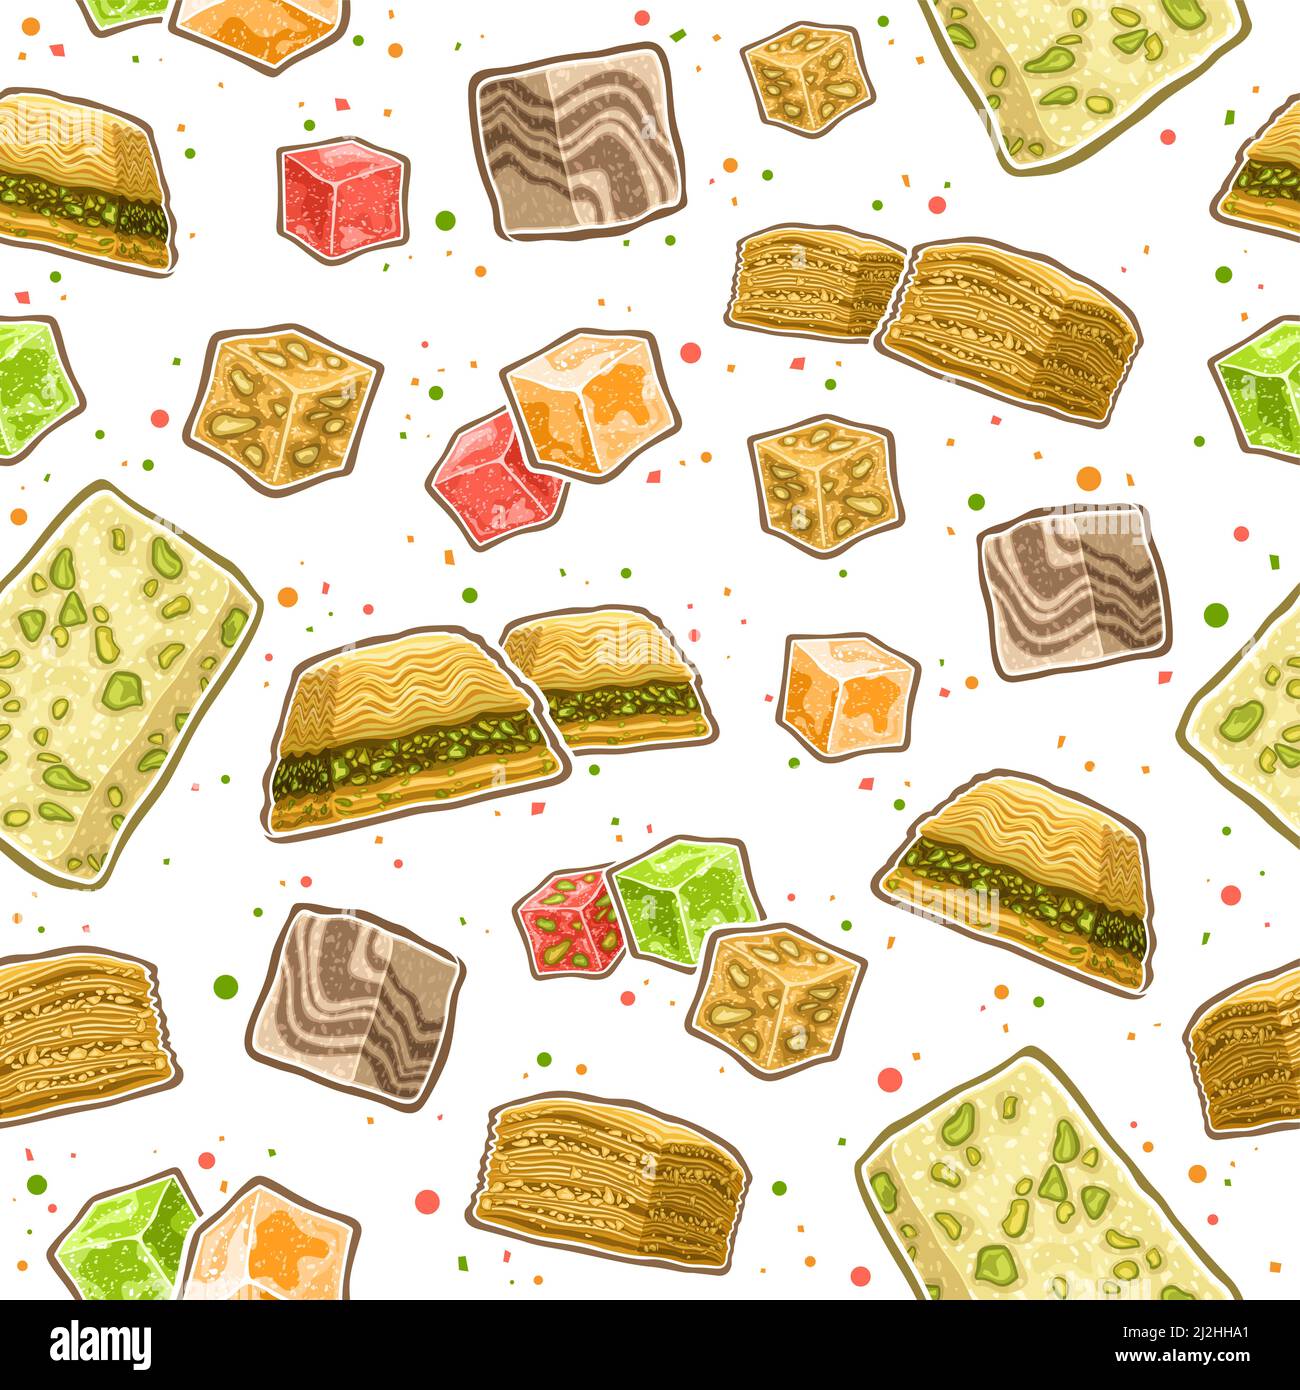 Vector Turkish Sweets seamless pattern, square repeating background with set of cut out illustrations variety lebanese sweet rahat lokum in cubes shap Stock Vector